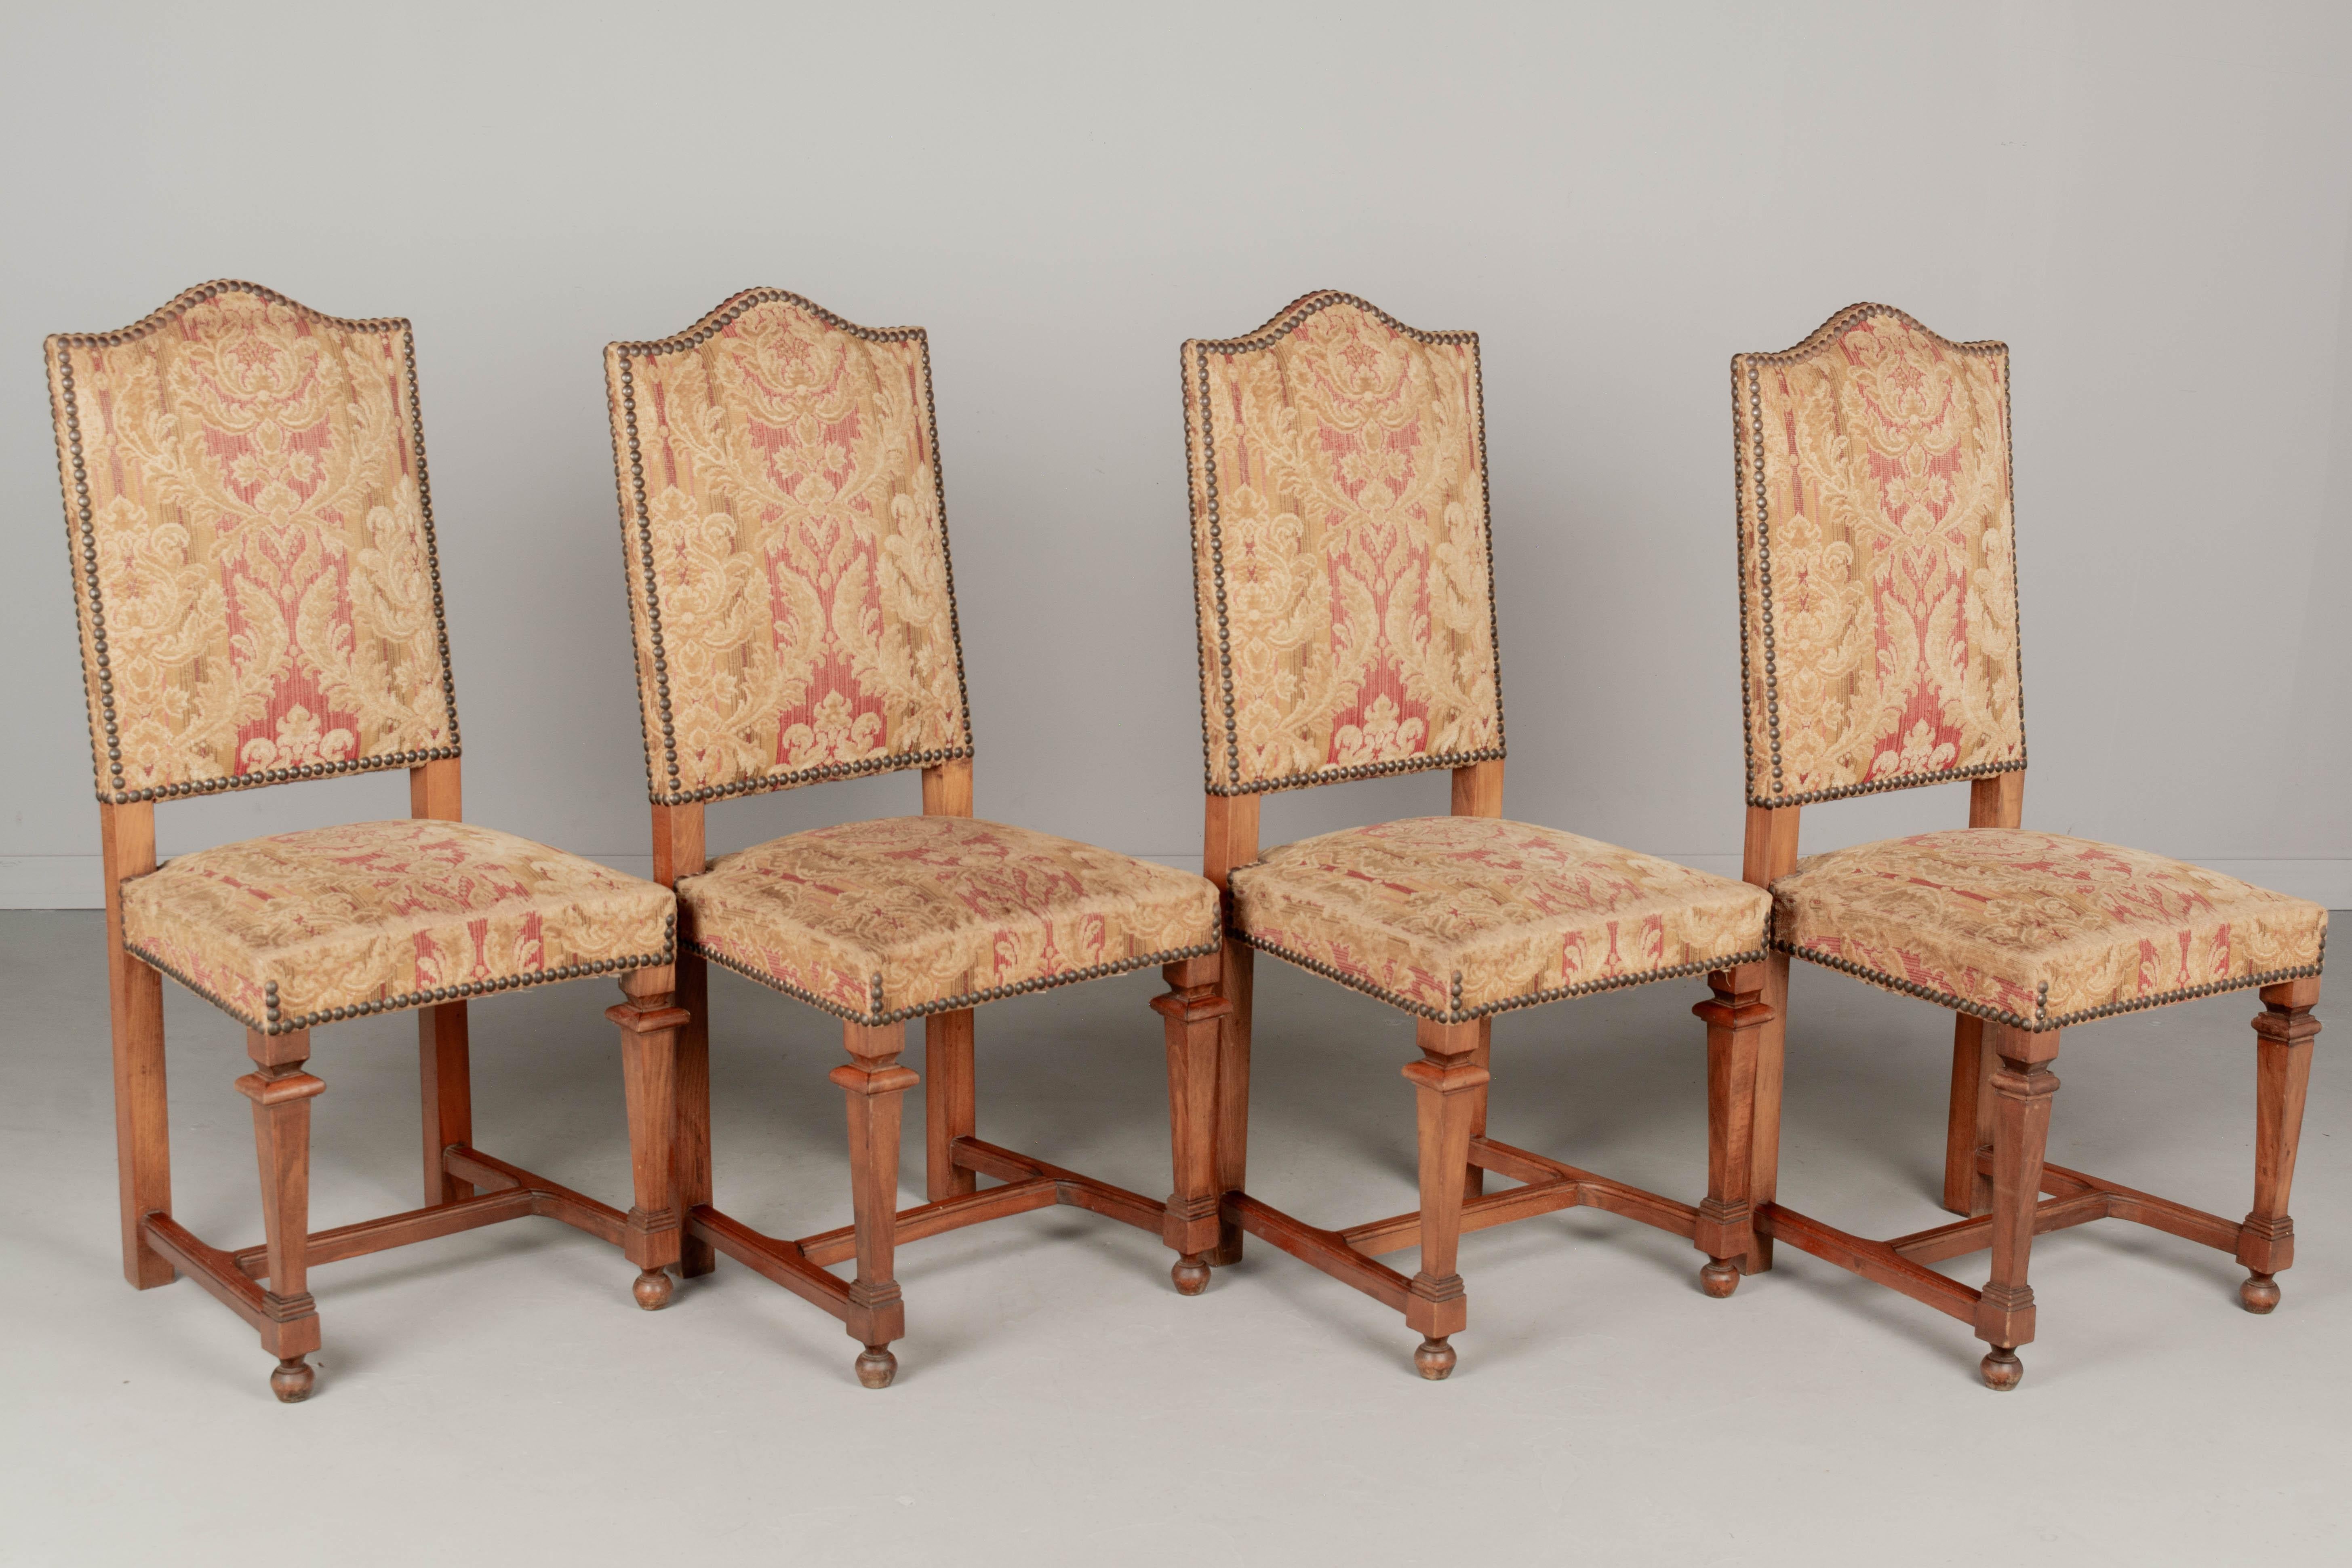 A set of four French Vintage Louis XIII style dining chairs with solid beech wood frames. Original velvet brocade upholstery with nailhead trim. Sturdy and well-constructed with tall backs and stretchers. Fabric is in serviceable condition,